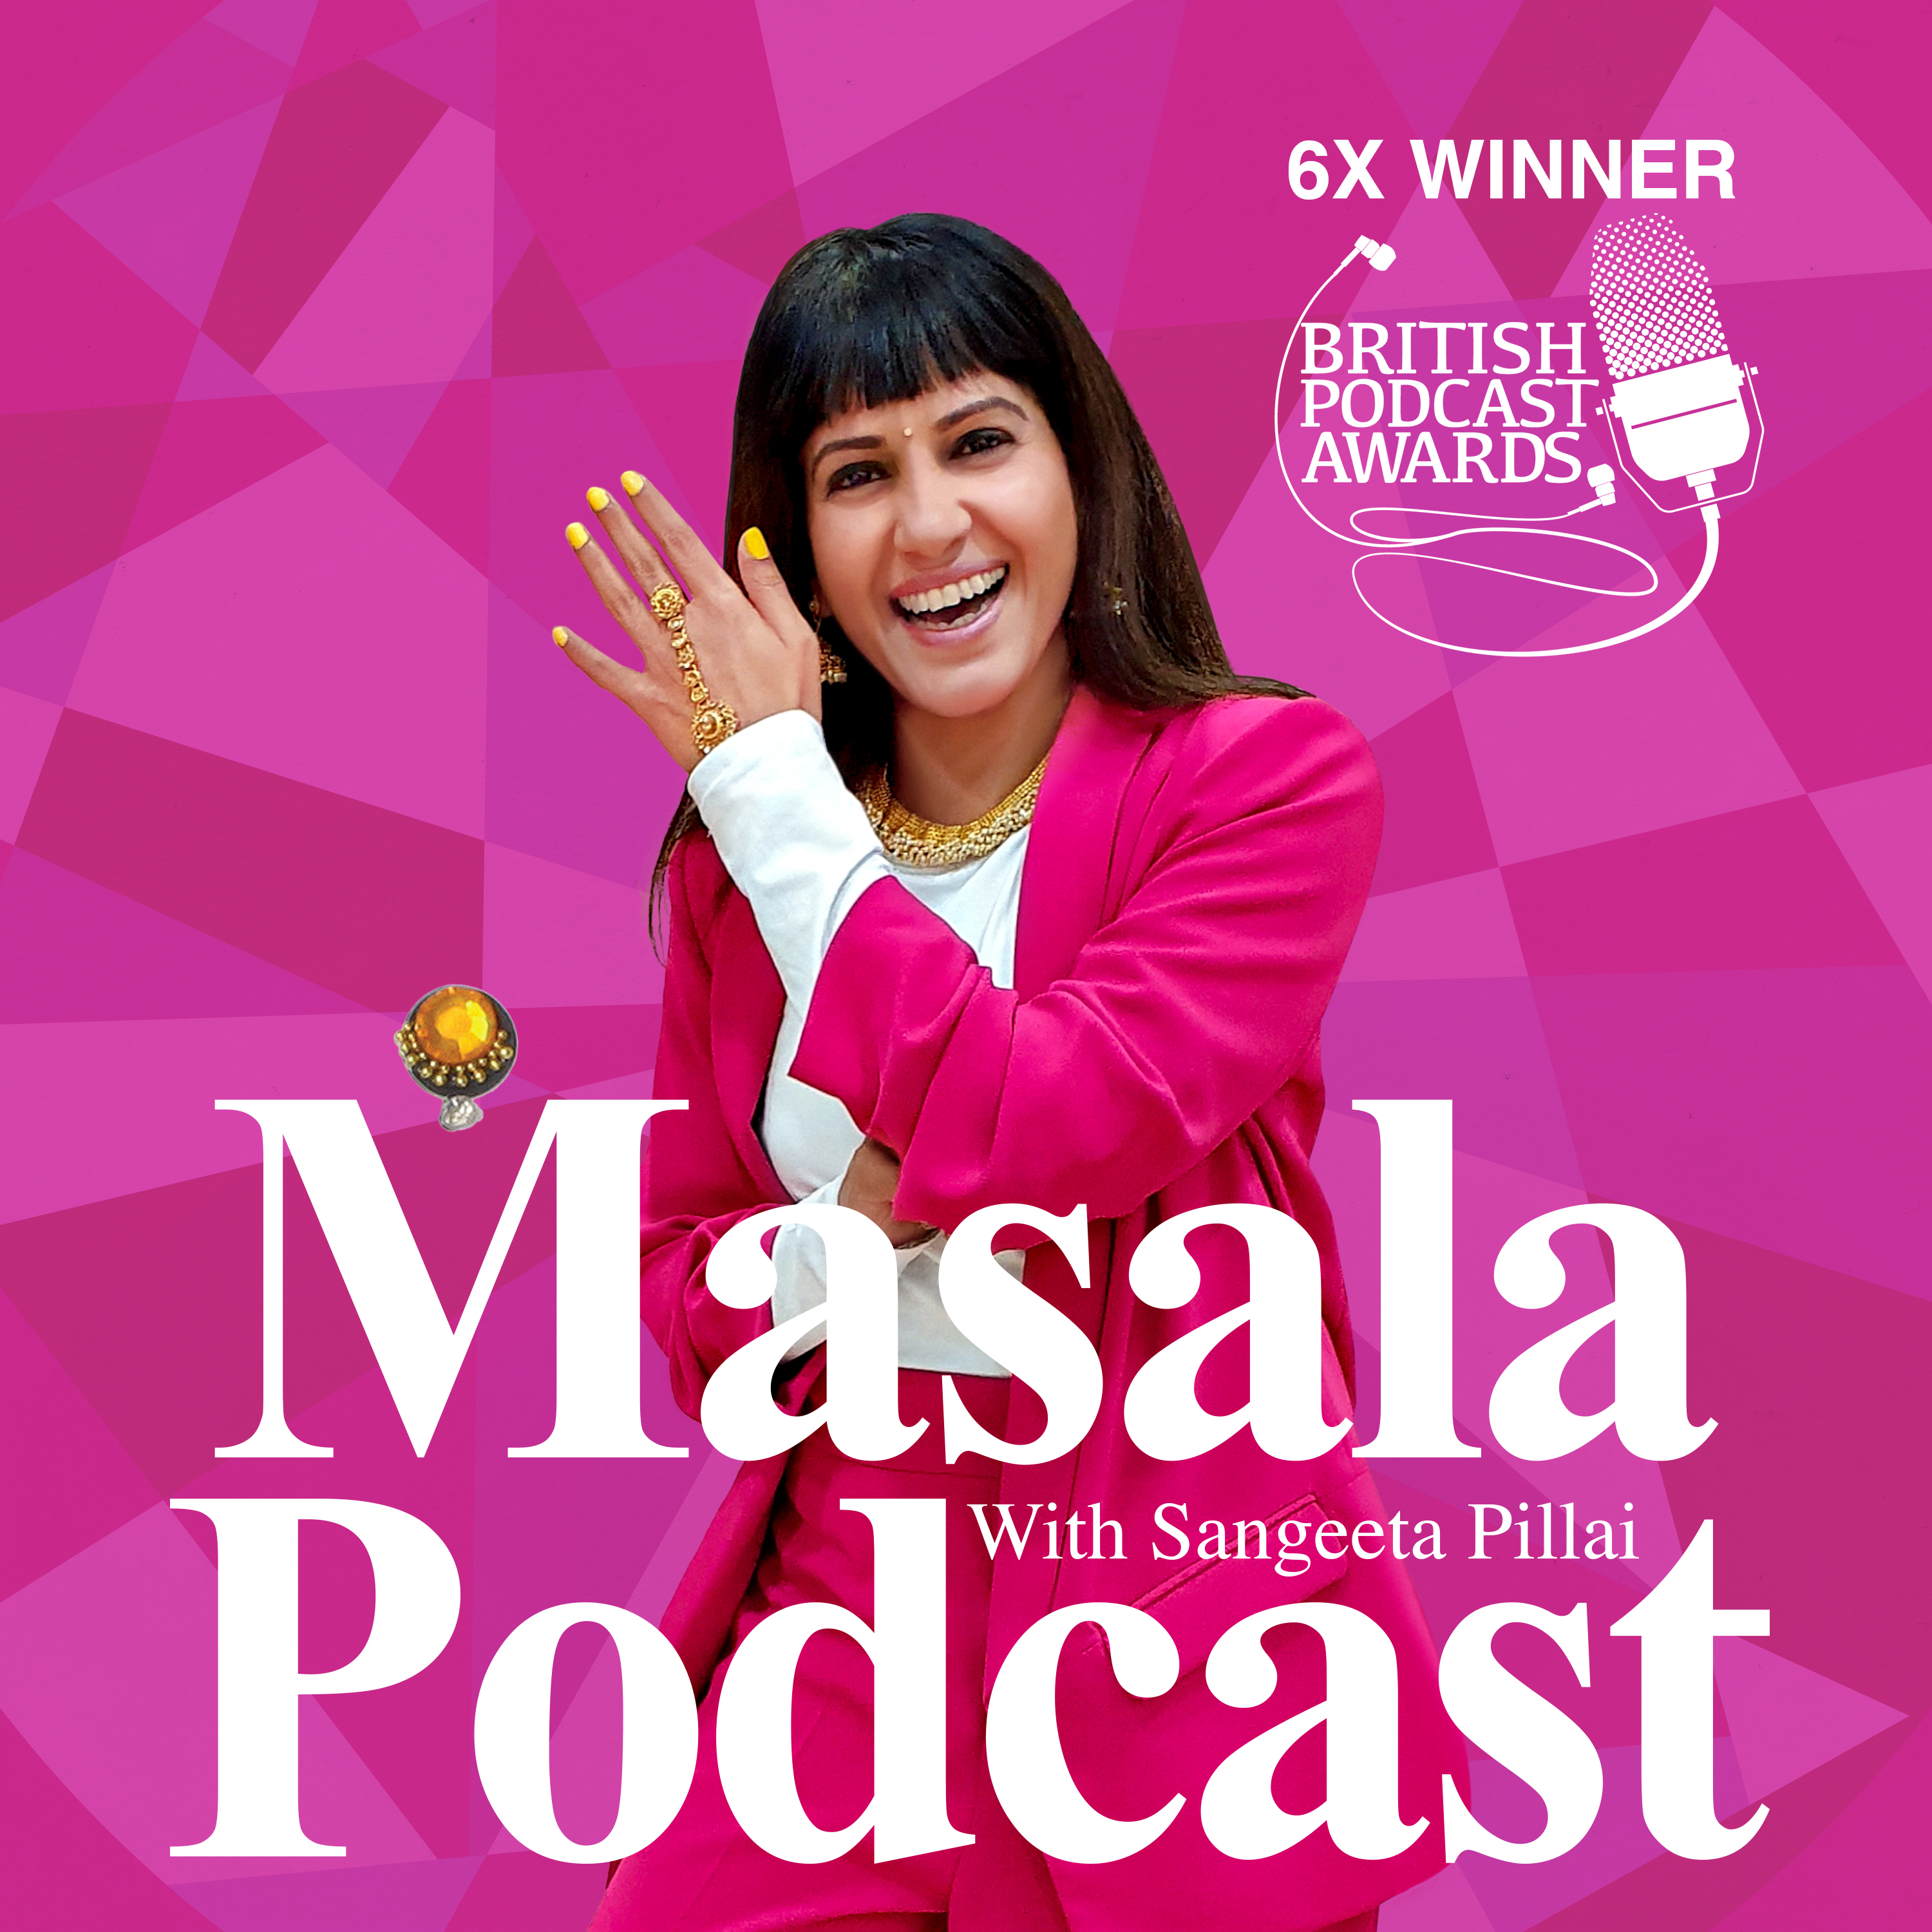 S5 EP6: Melanie Chandra - Hollywood celeb on why diverse stories matter